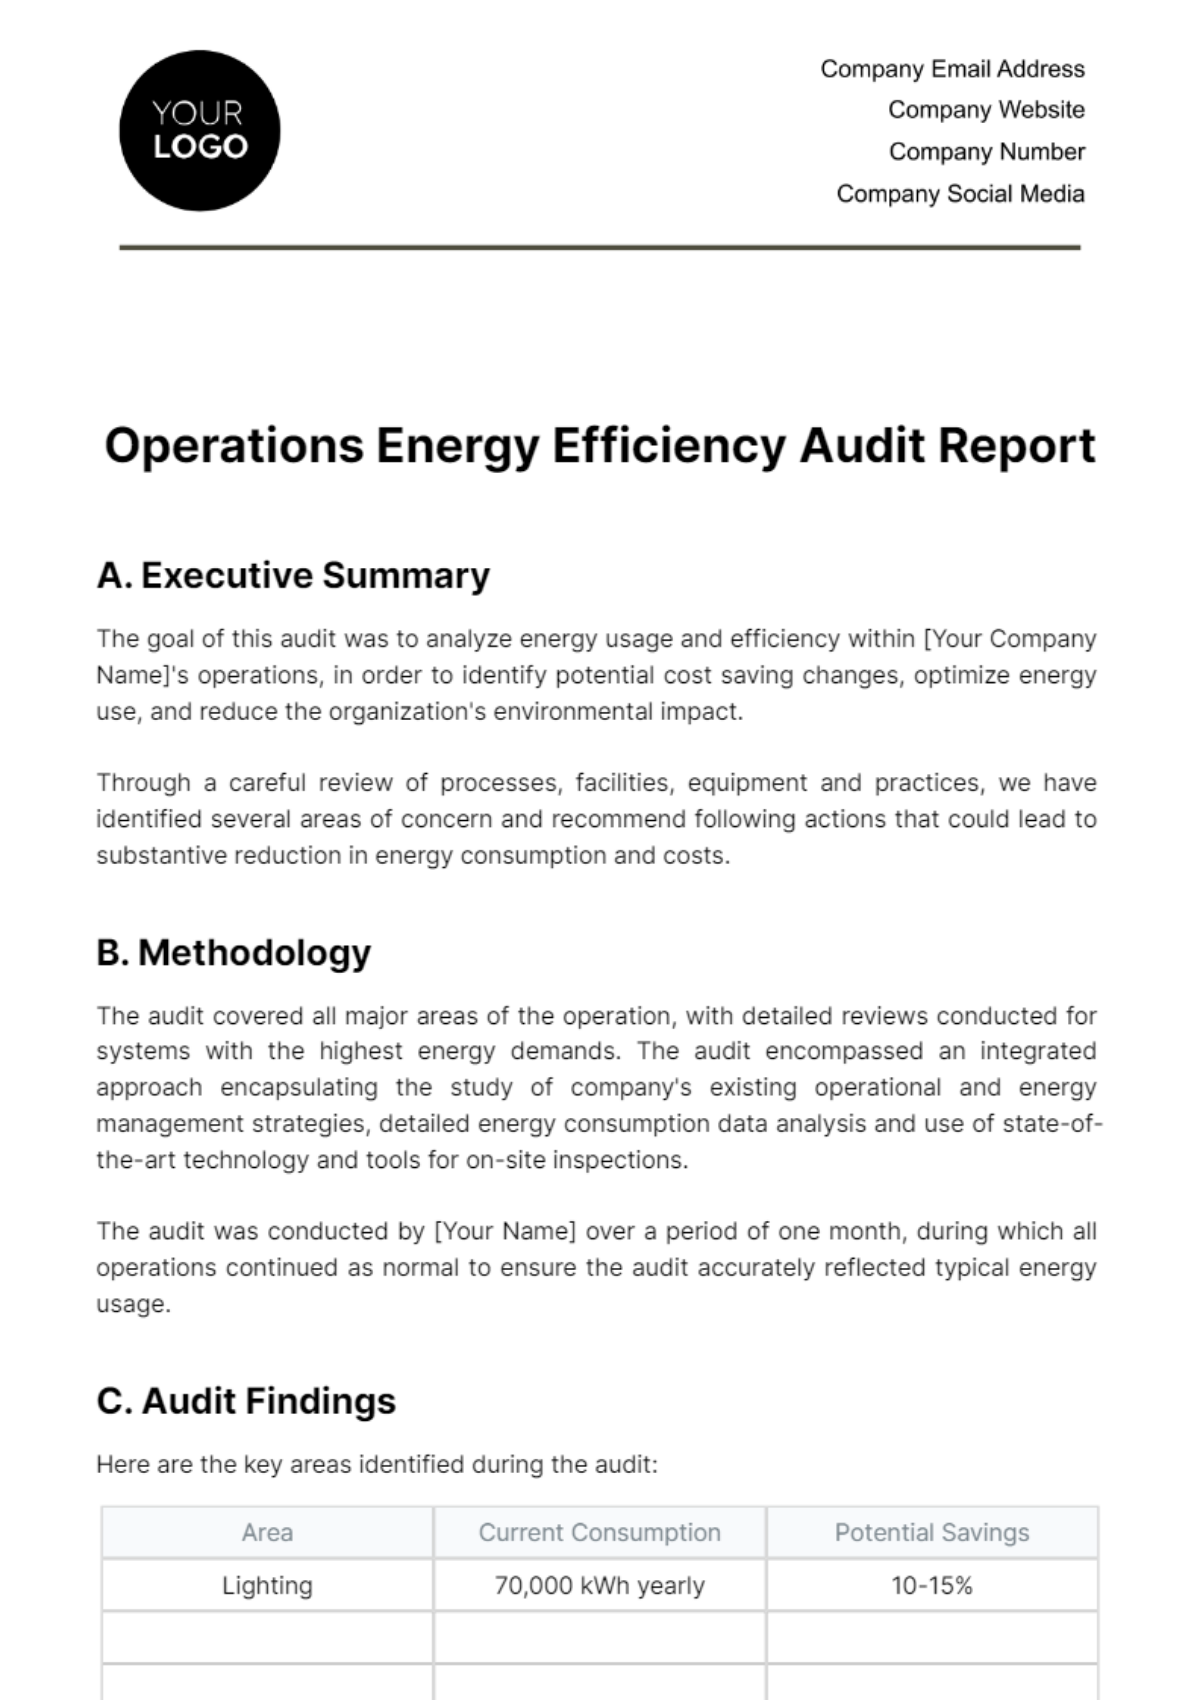 Operations Energy Efficiency Audit Report Template